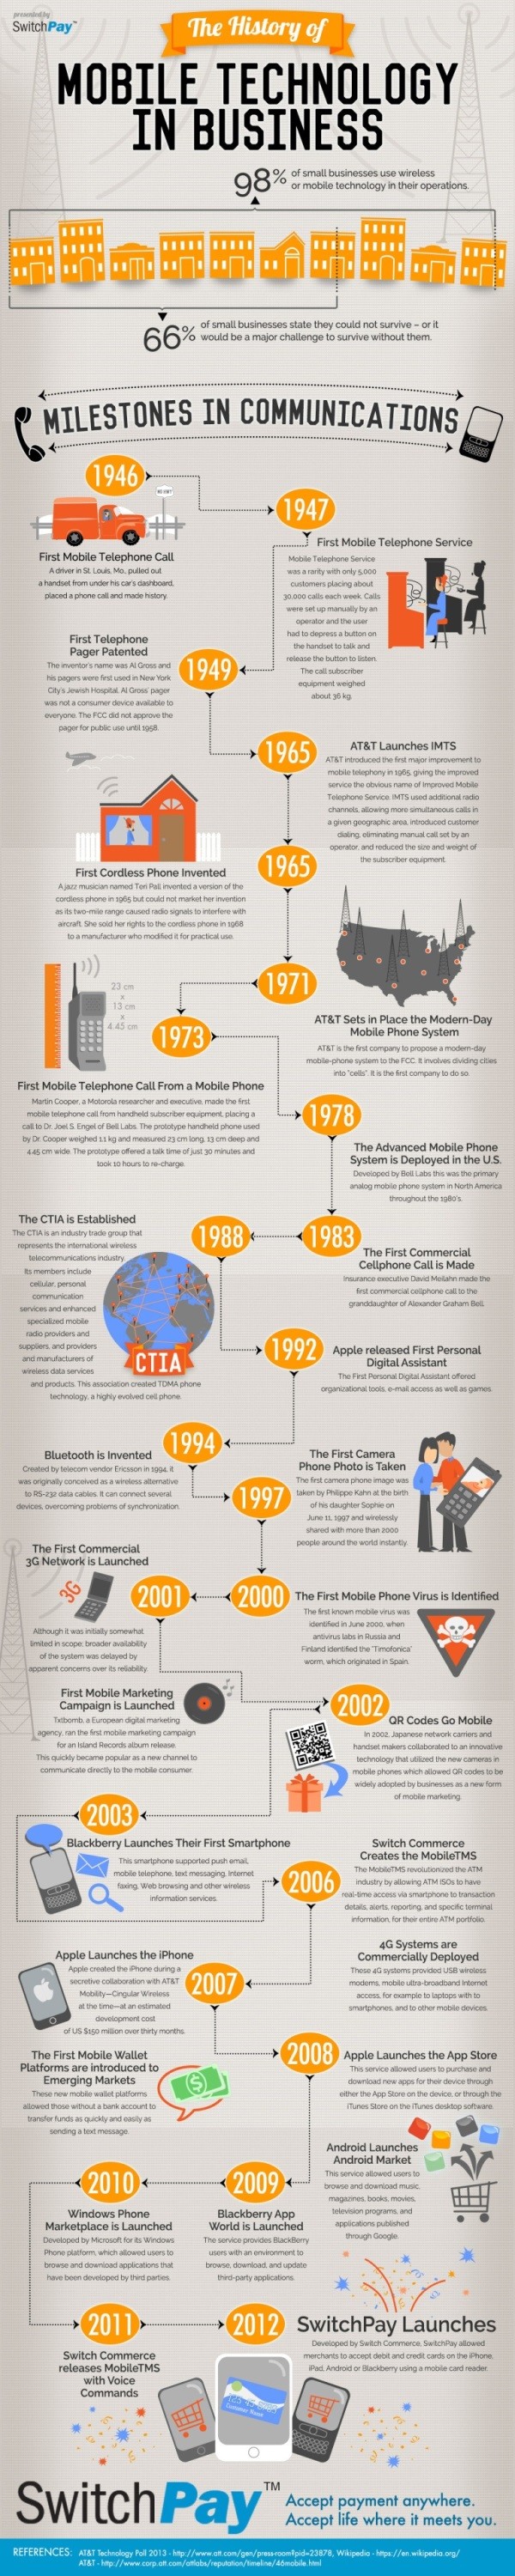 History_of_Mobile_Tech-2013